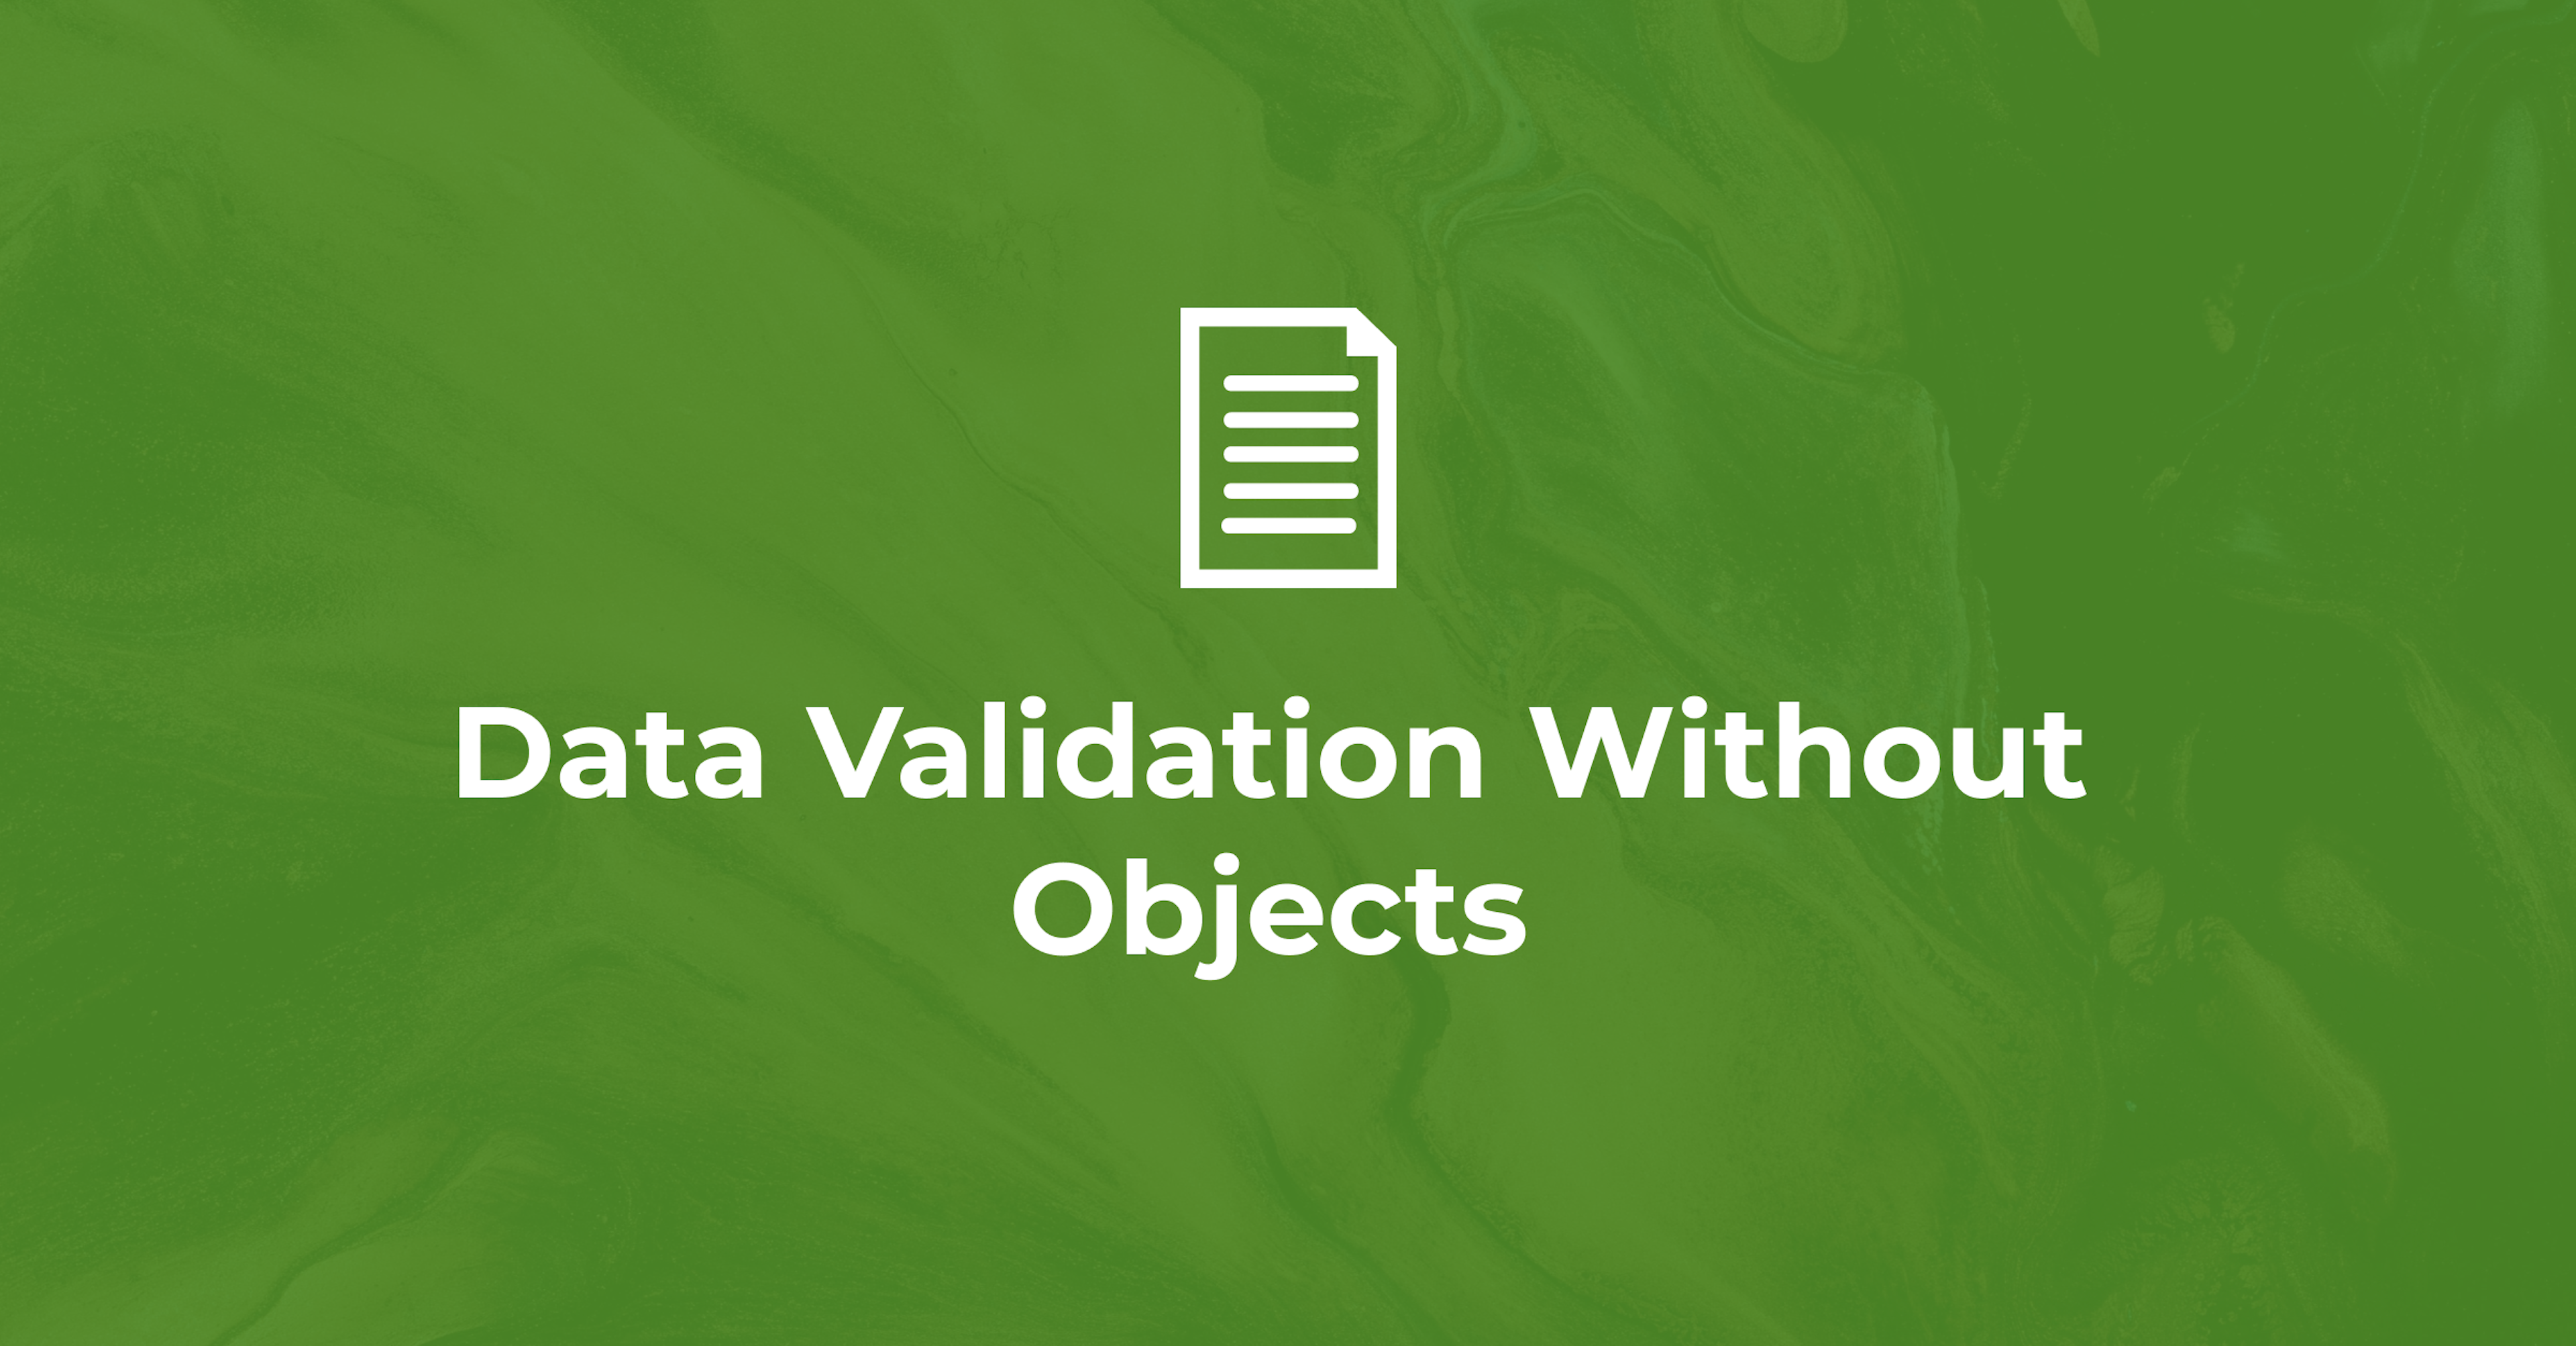 Data Validation Without Objects